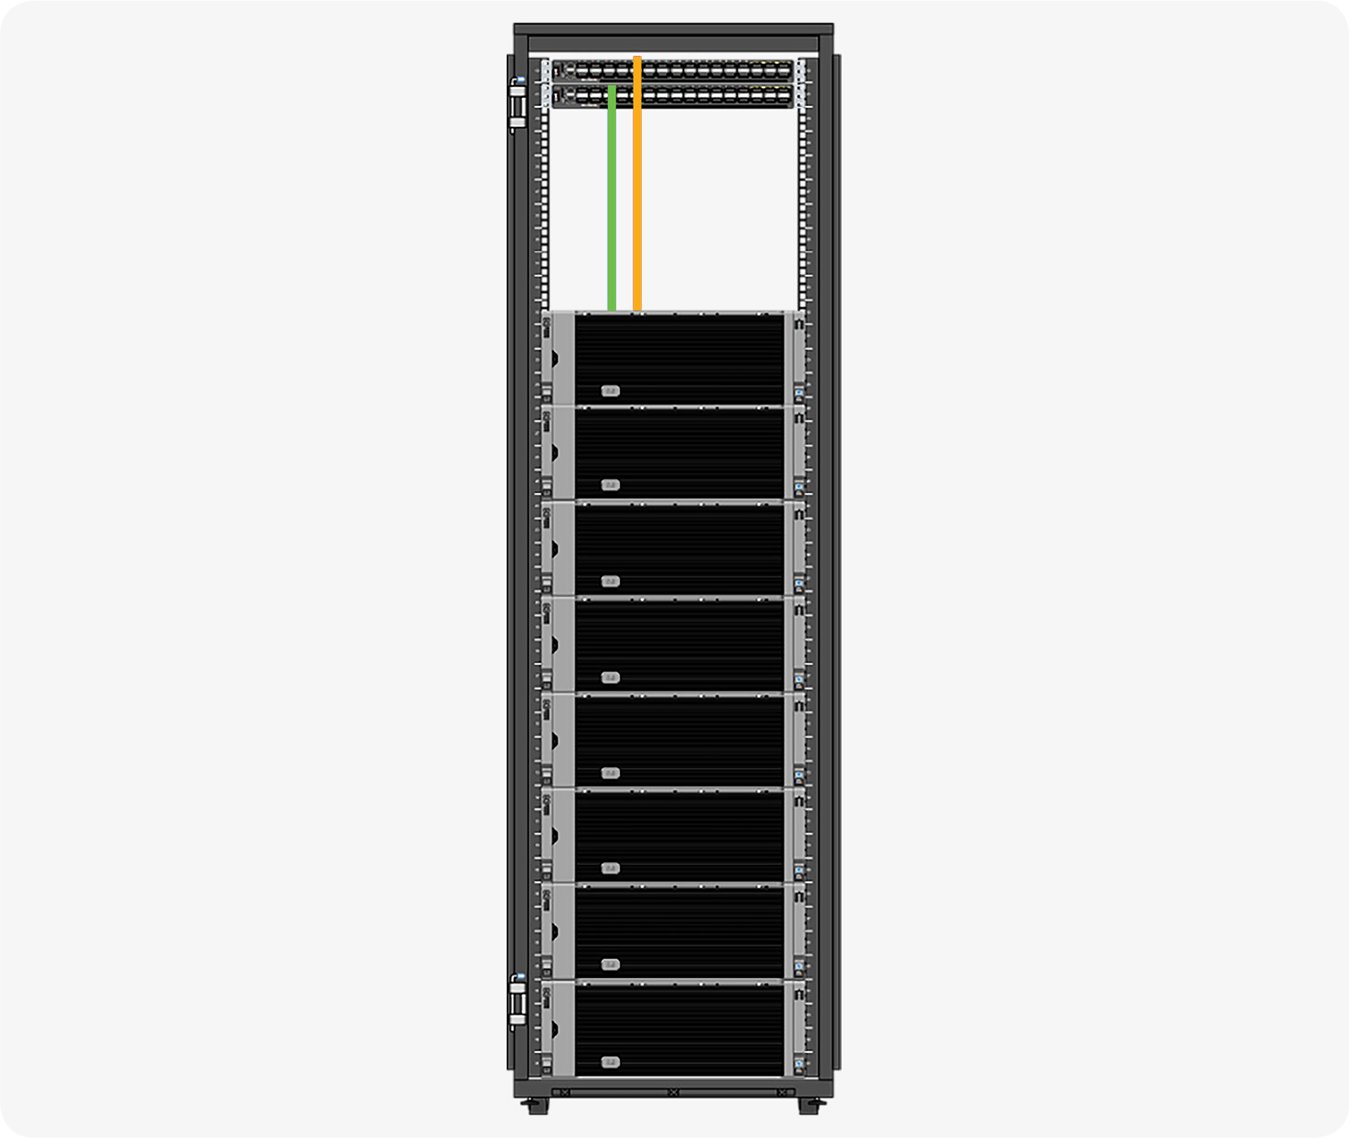 Cisco UCS S3260 Storage Server with S3260 M5 server node reference architecture